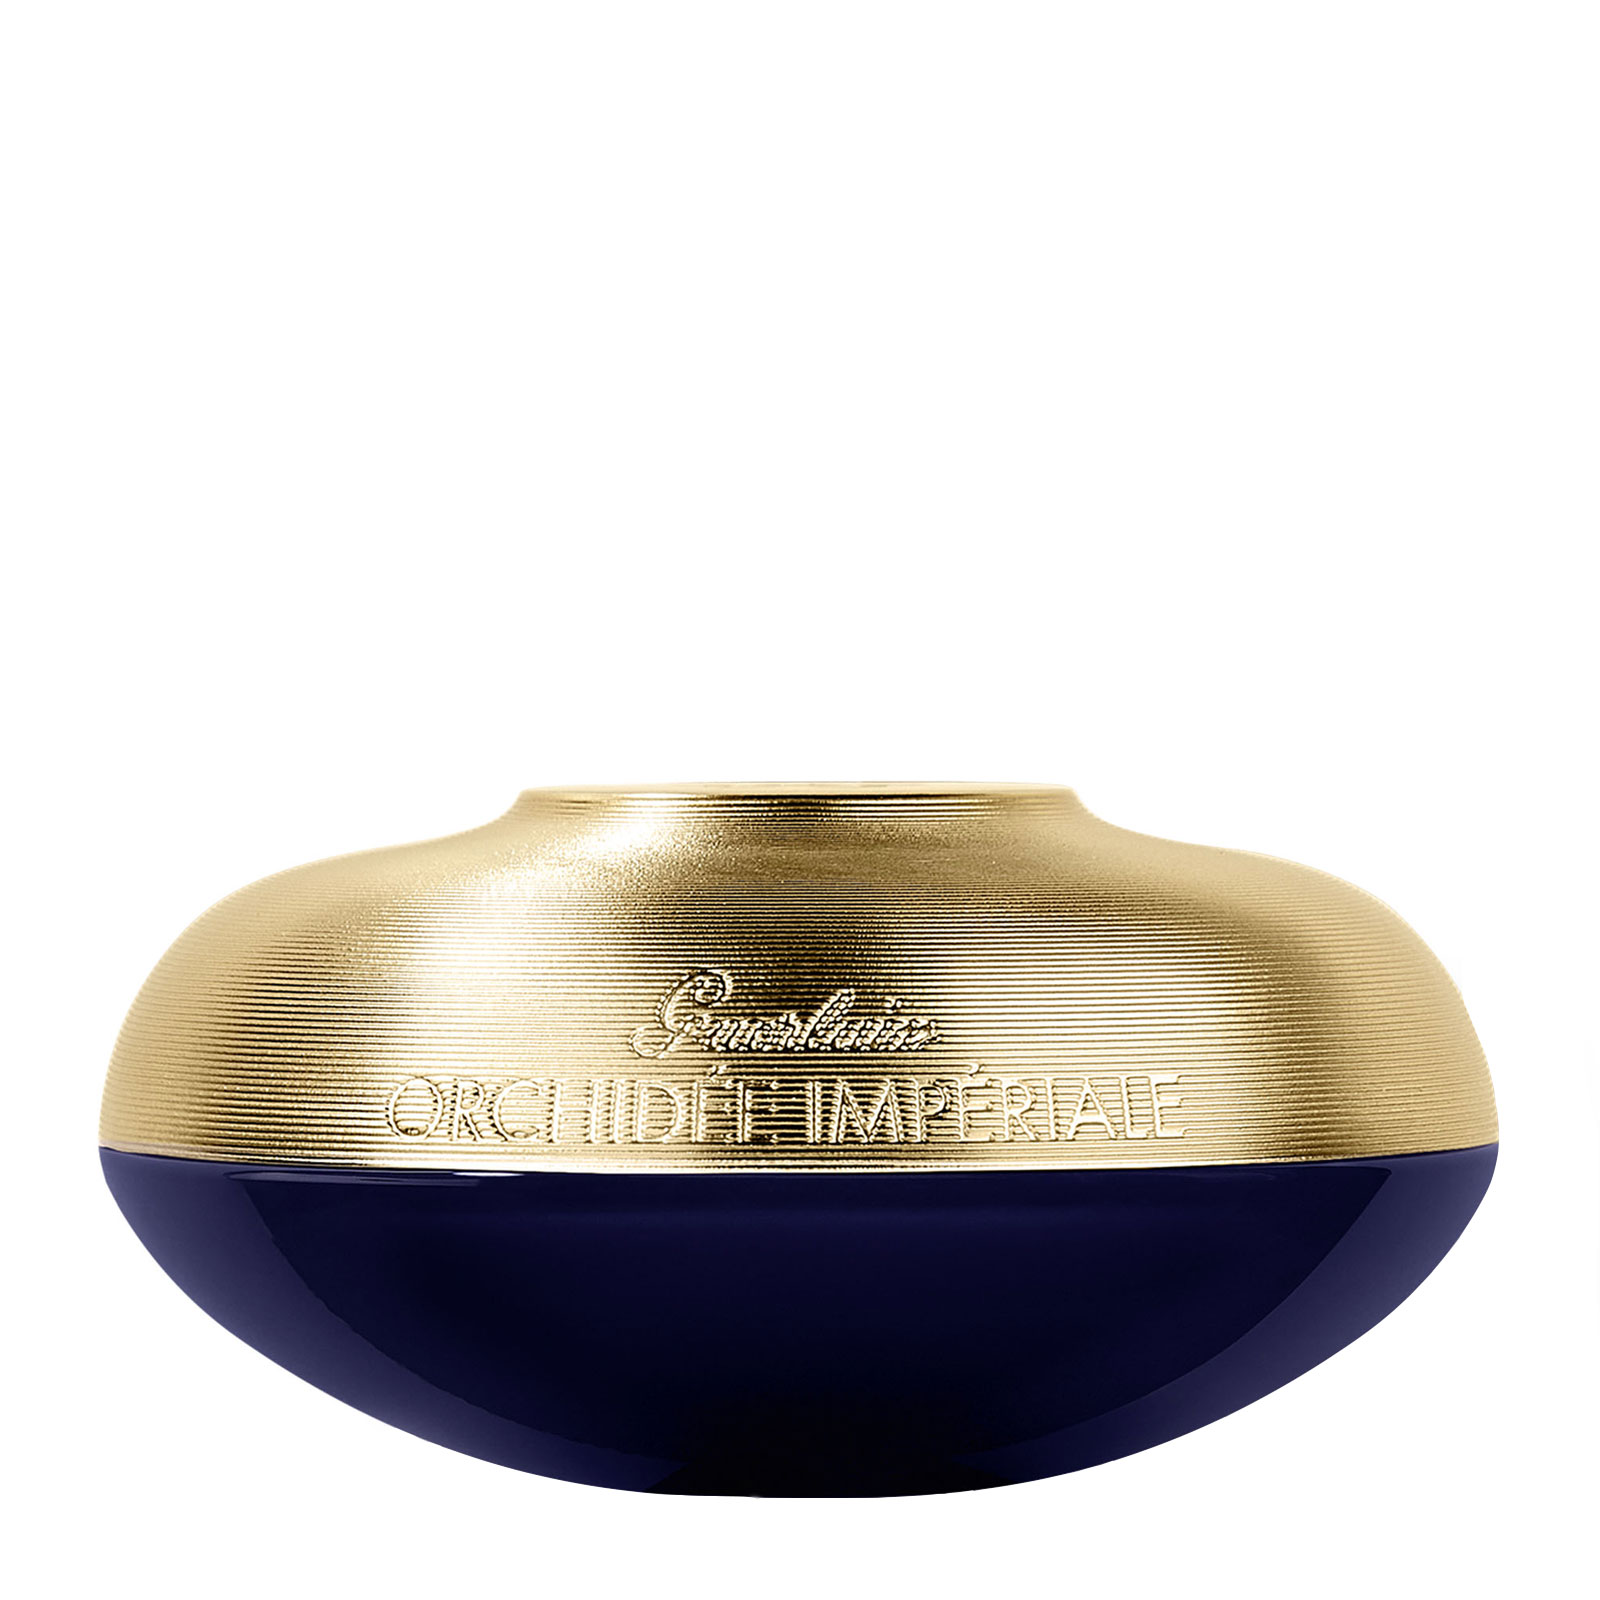 GUERLAIN Orchidee Imperiale The Eye And Lip Cream 15ml